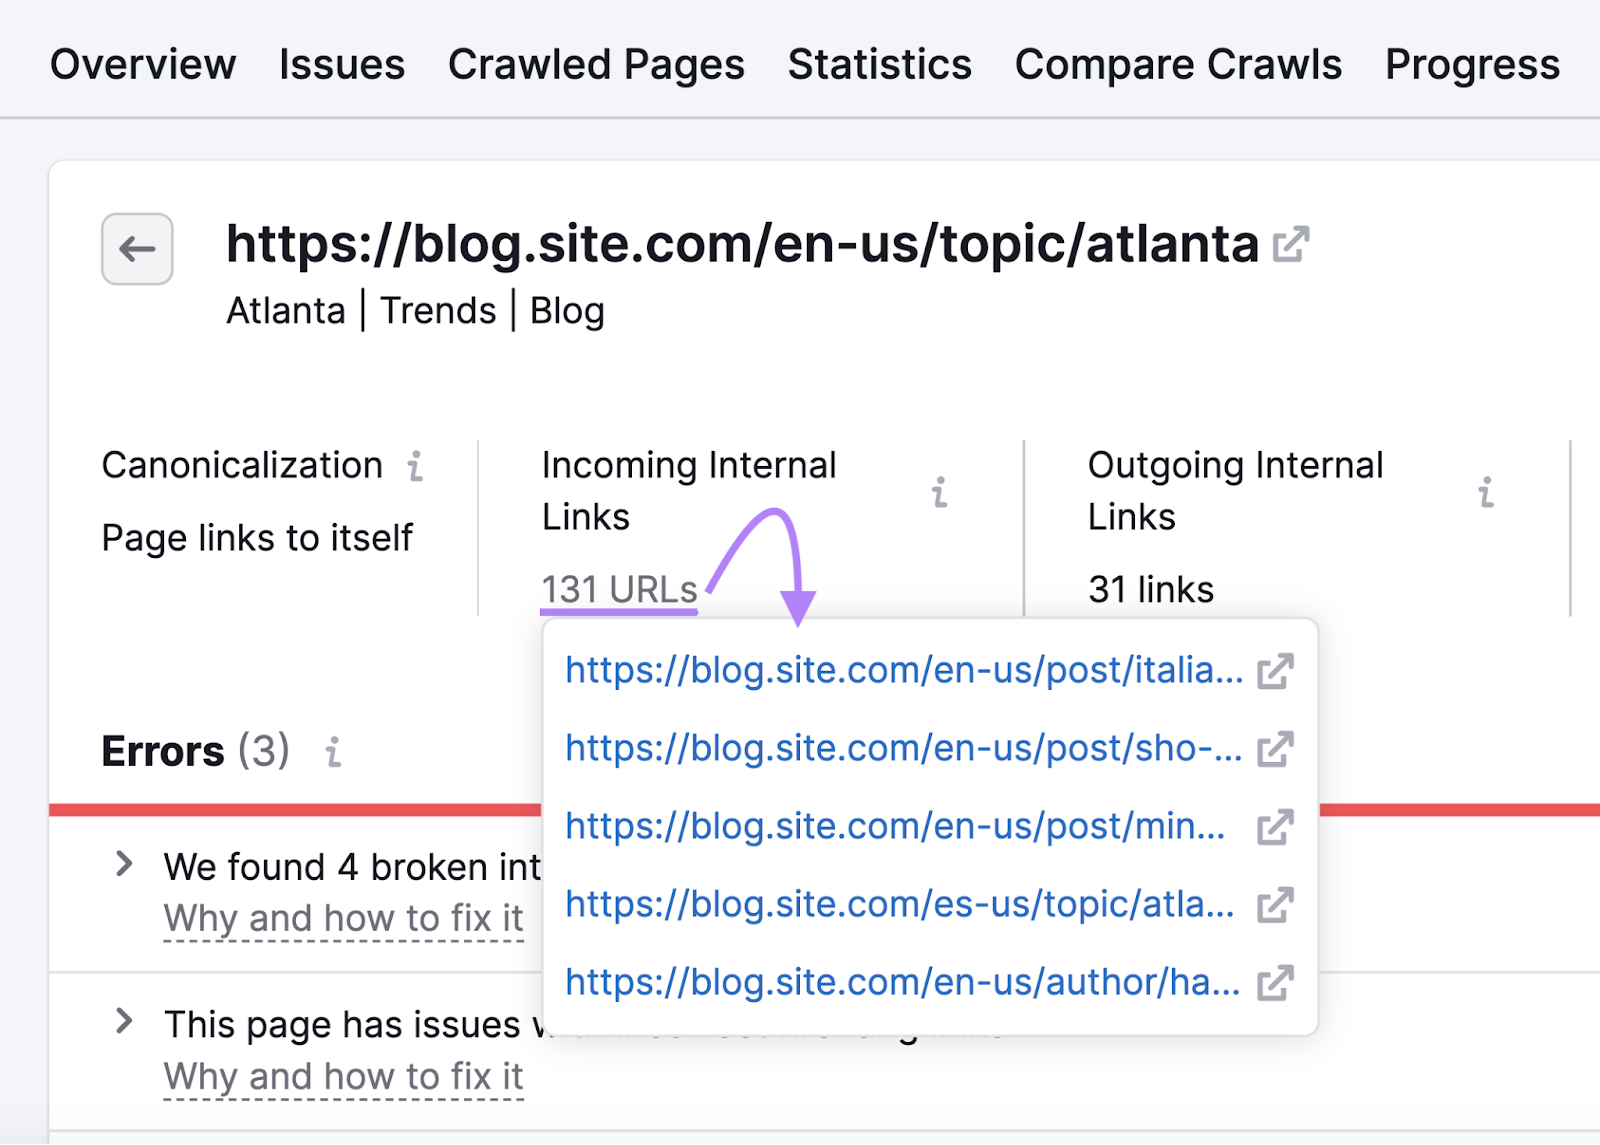 "131 URLs" button opened under “Incoming Internal Links" section